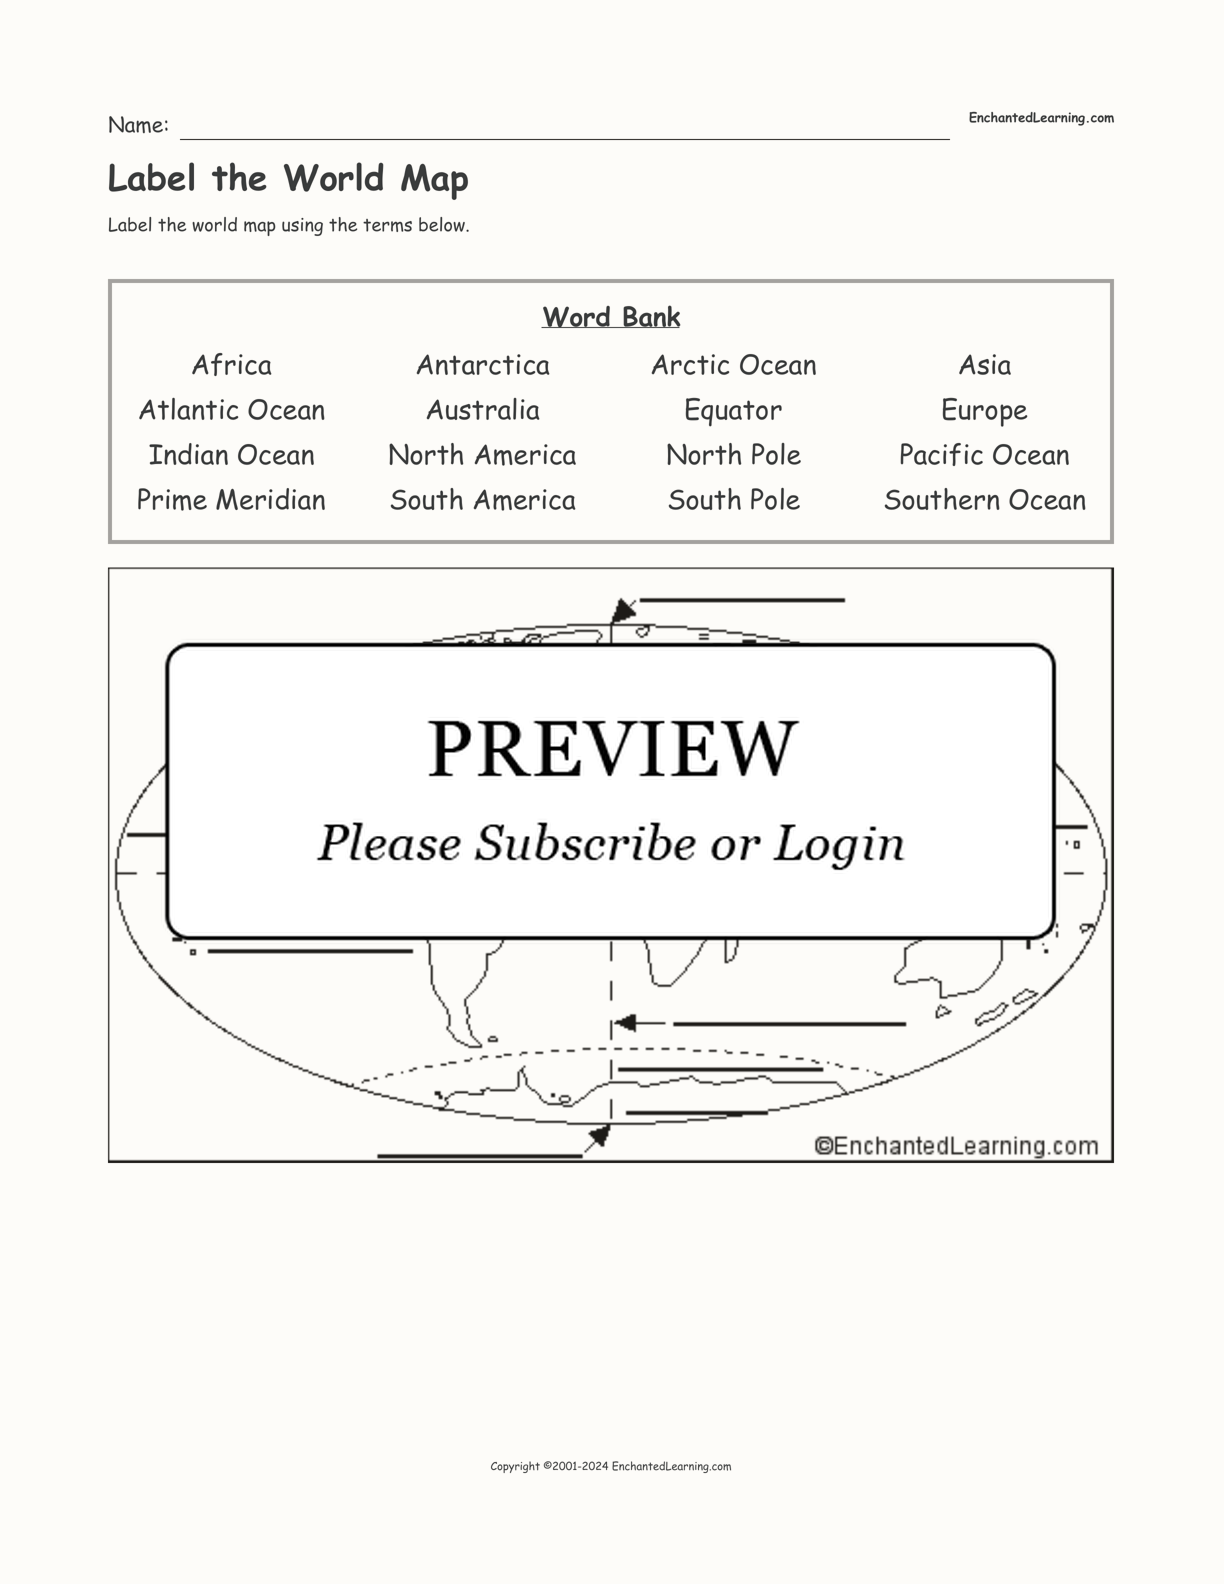 Label the World Map interactive worksheet page 1